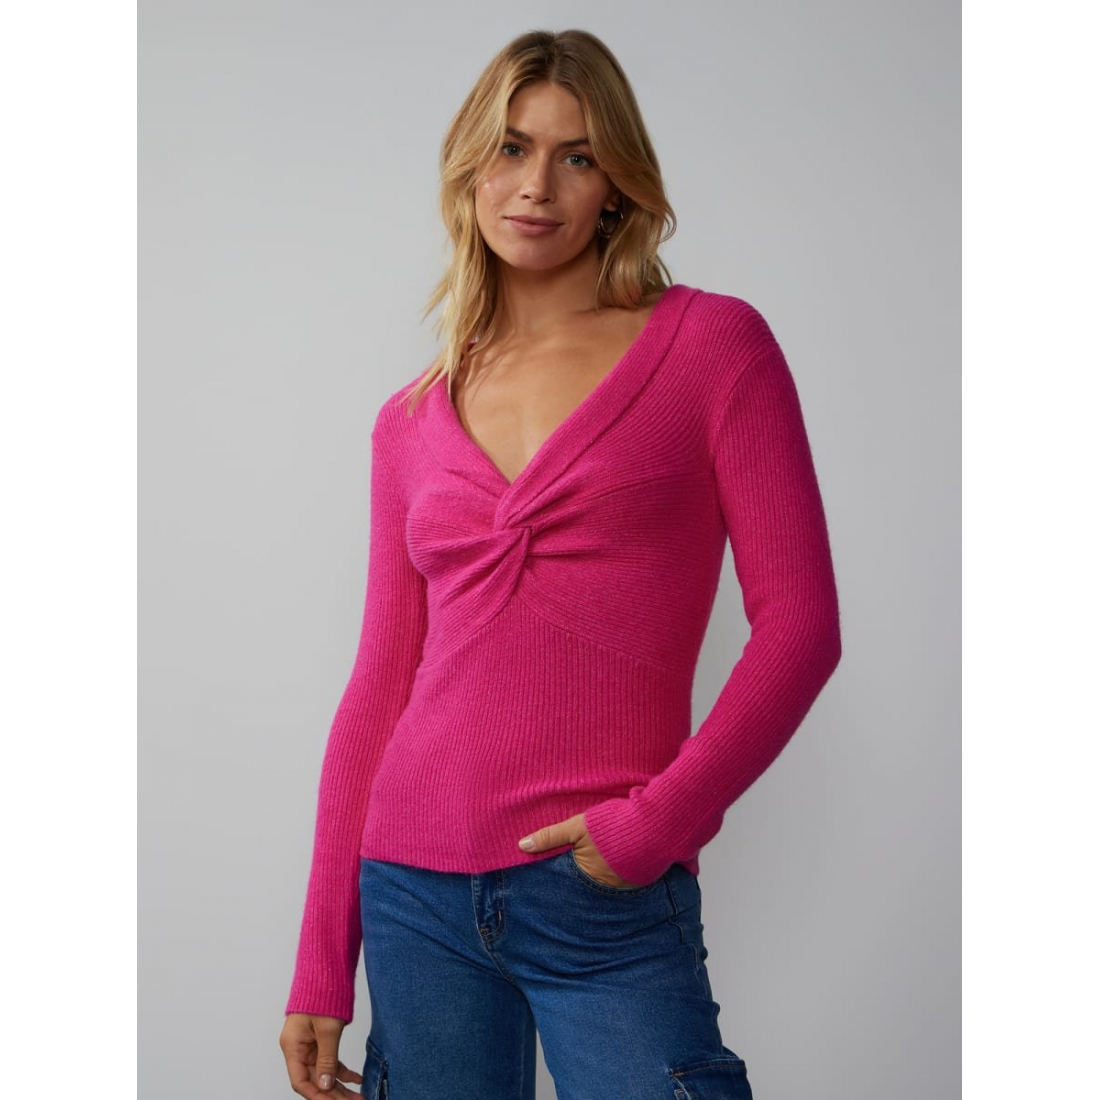 Women's 'Twist Front Fitted' Sweater